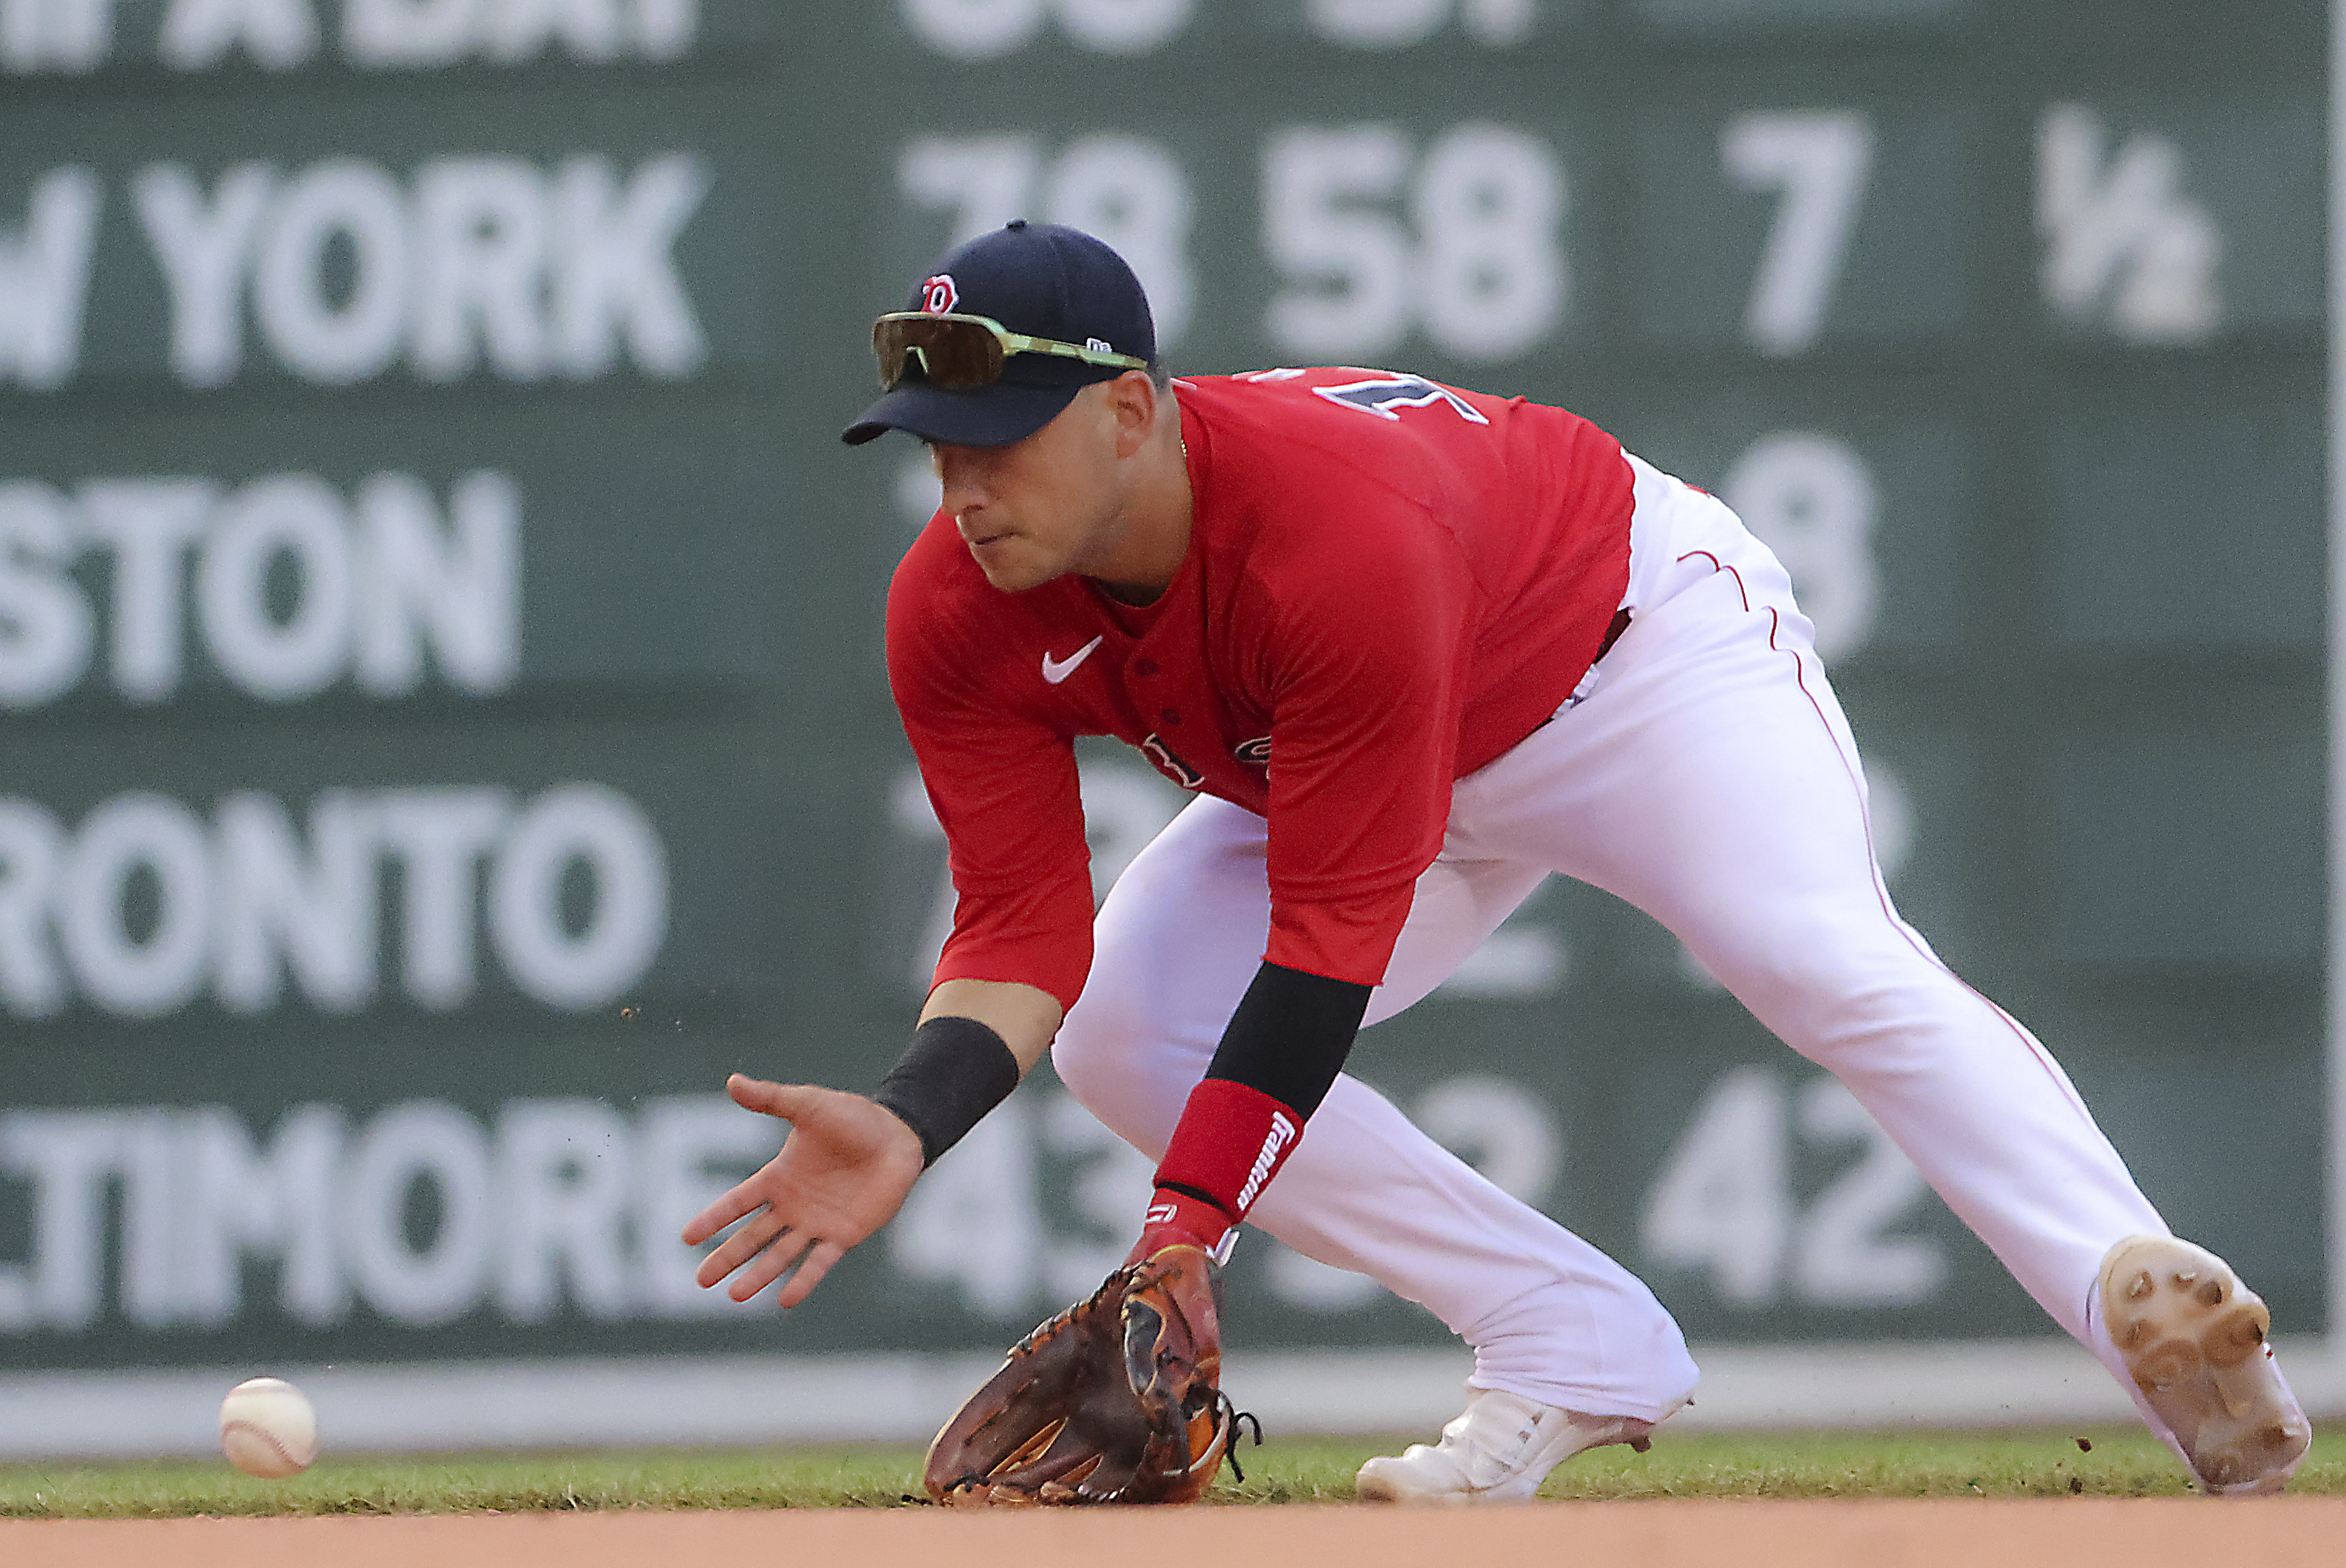 Red Sox news: Free agency target Jose Iglesias opts out of deal with Marlins